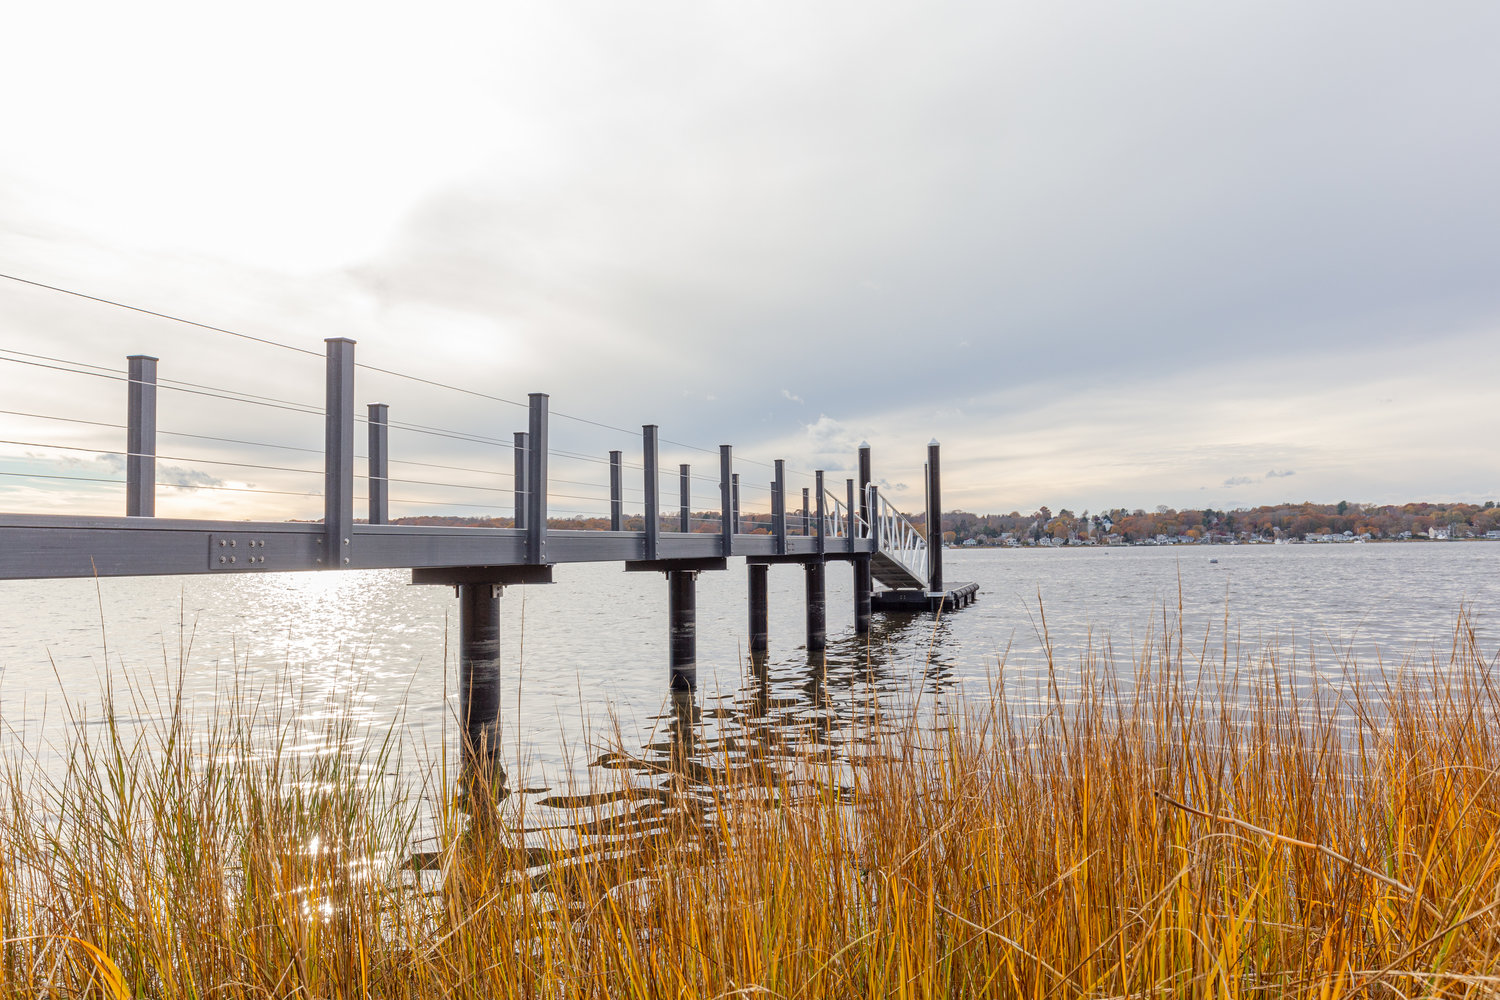 This angle shows the single line of pilings that support the Touisset dock. A series of four single pilings extends from shore into the water, before they fan out to double pilings at the end of the dock.